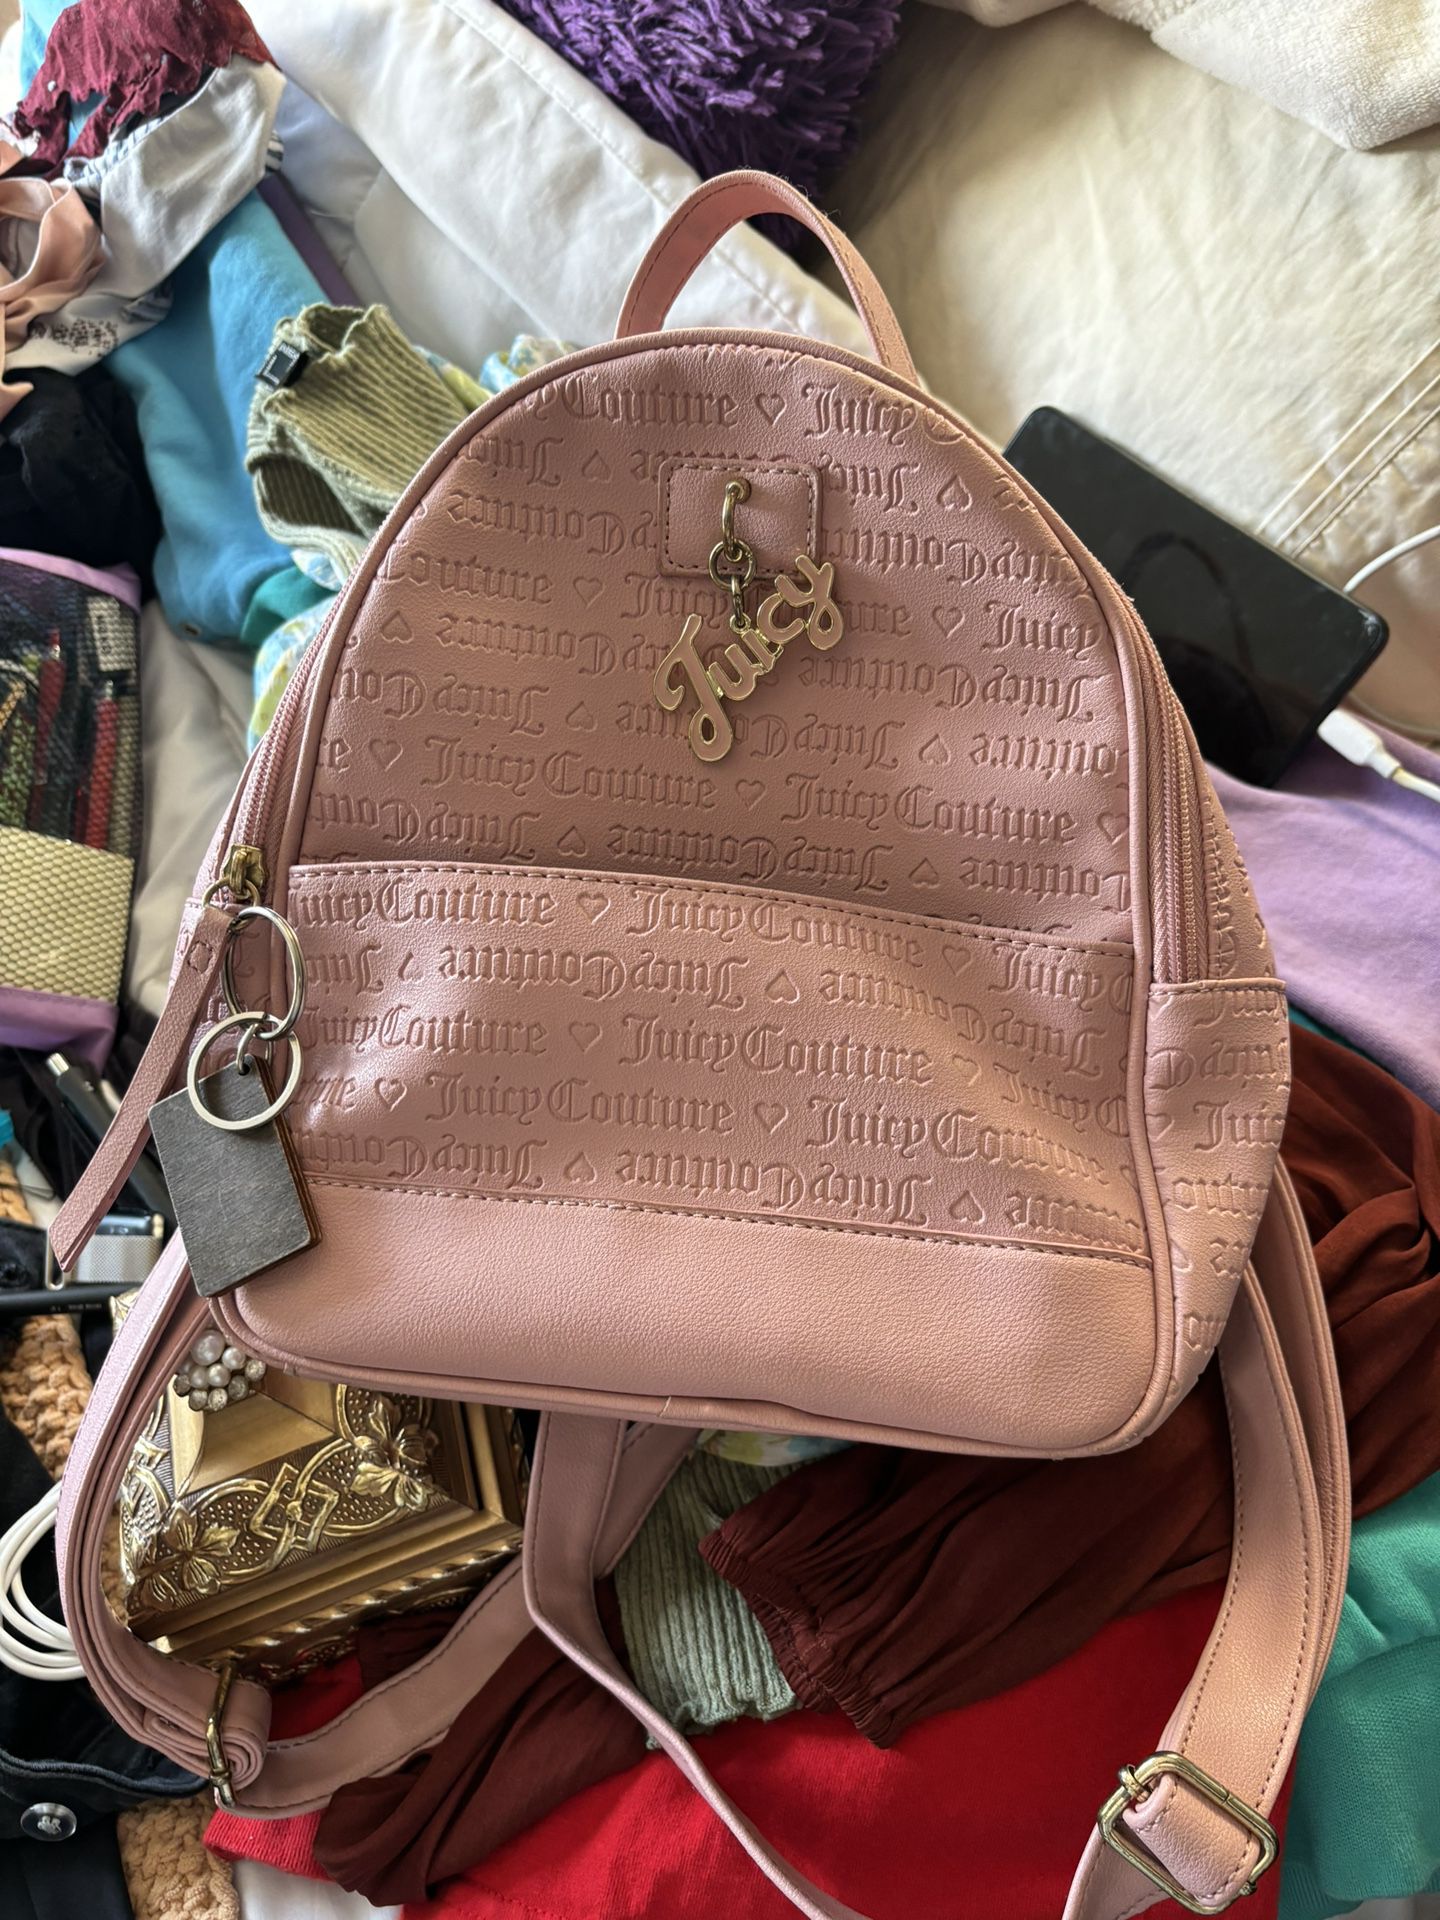 Juicy Couture Mini Back pack